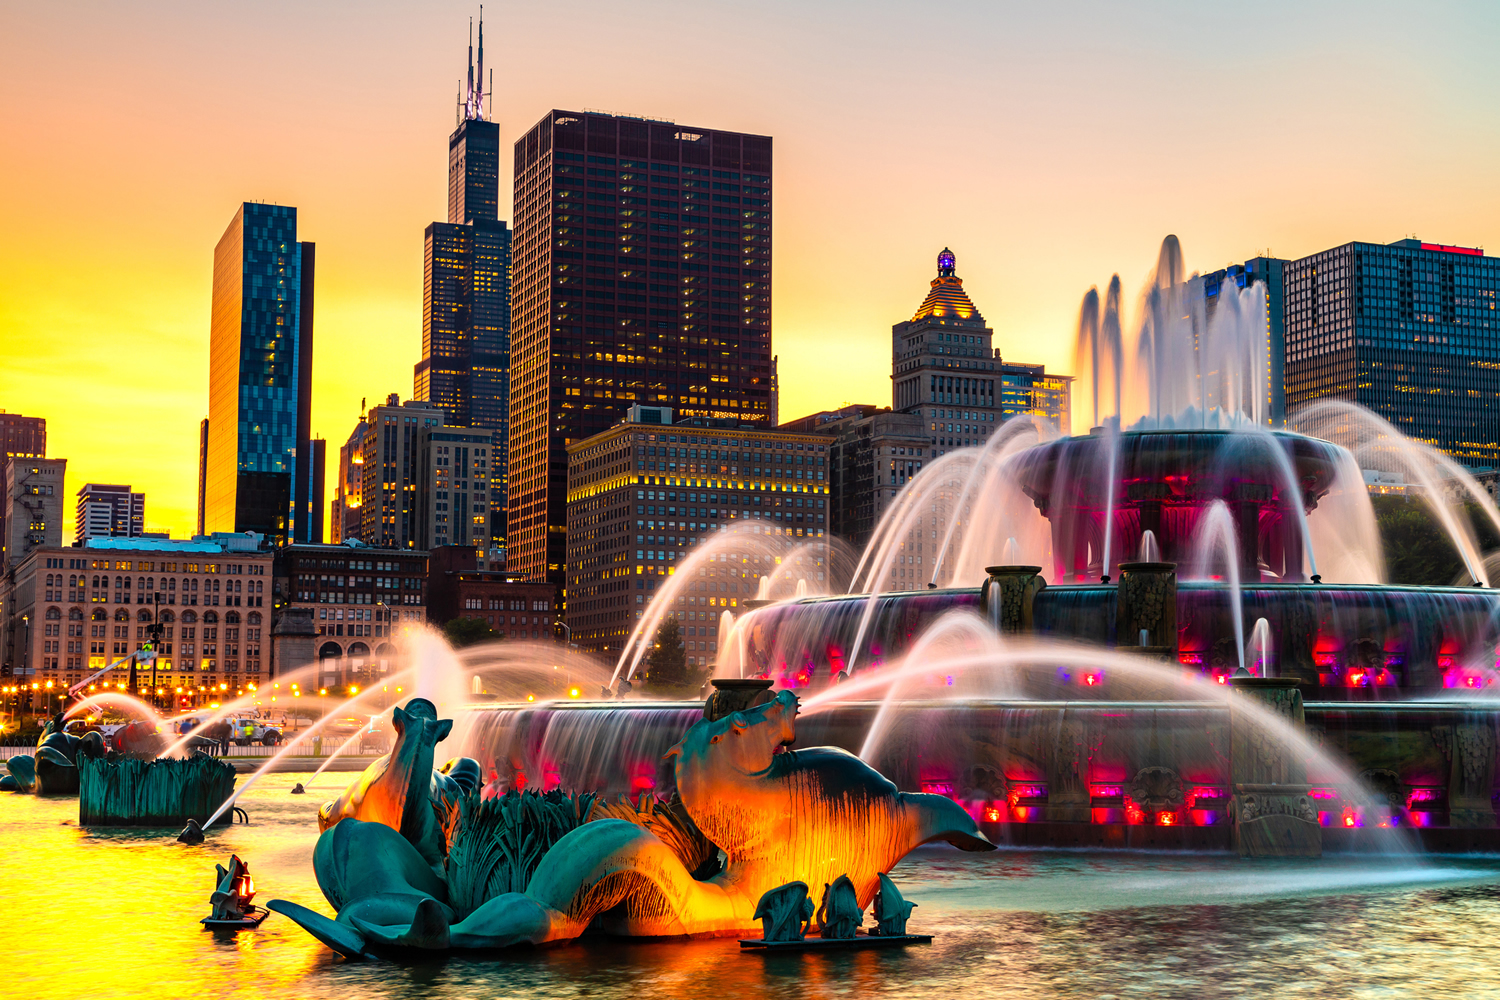 CHICAGO - A destination for foodies everywhere!